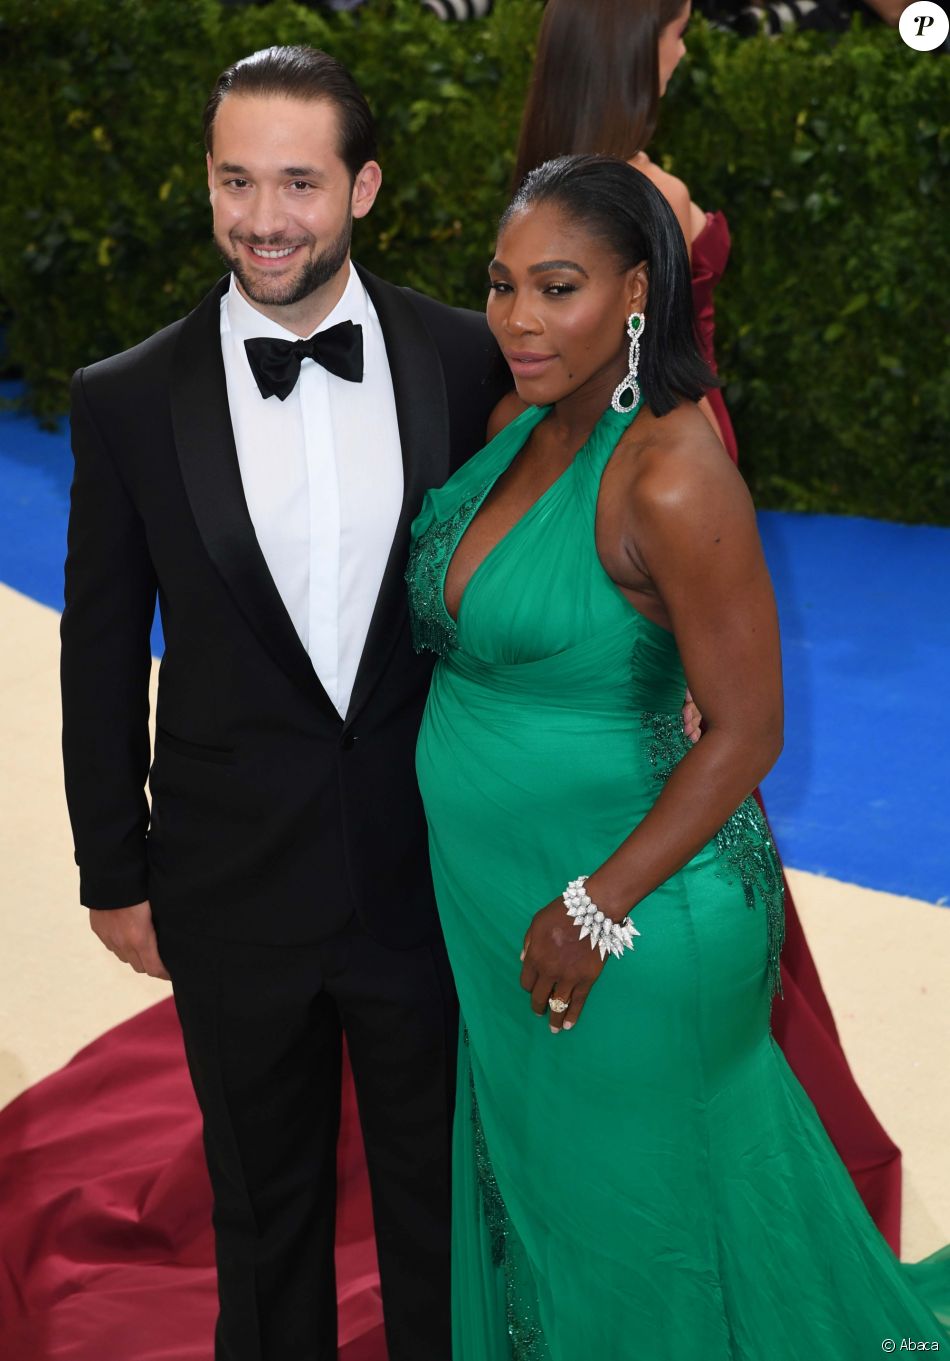  Alexis  Ohanian  and Serena  Williams  attending The 